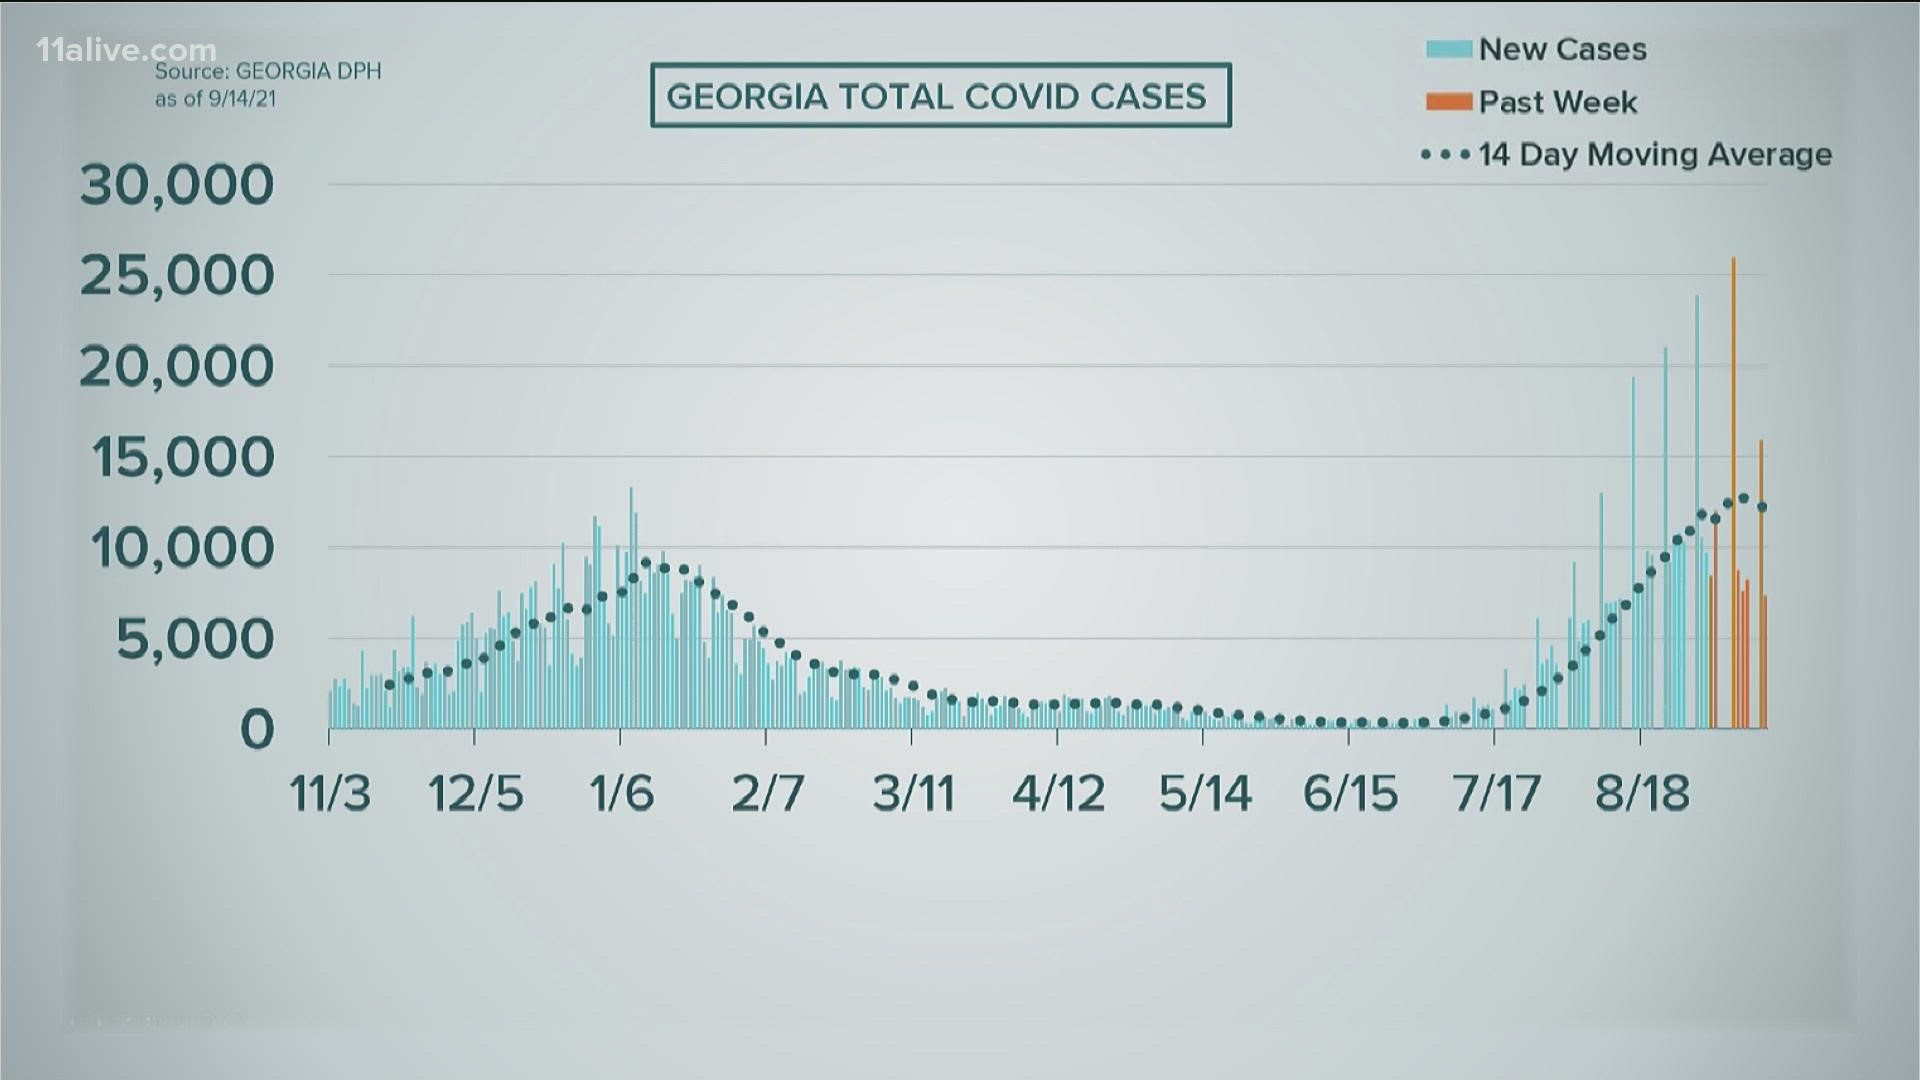 Georgia is seeing about 9,500 cases per day.